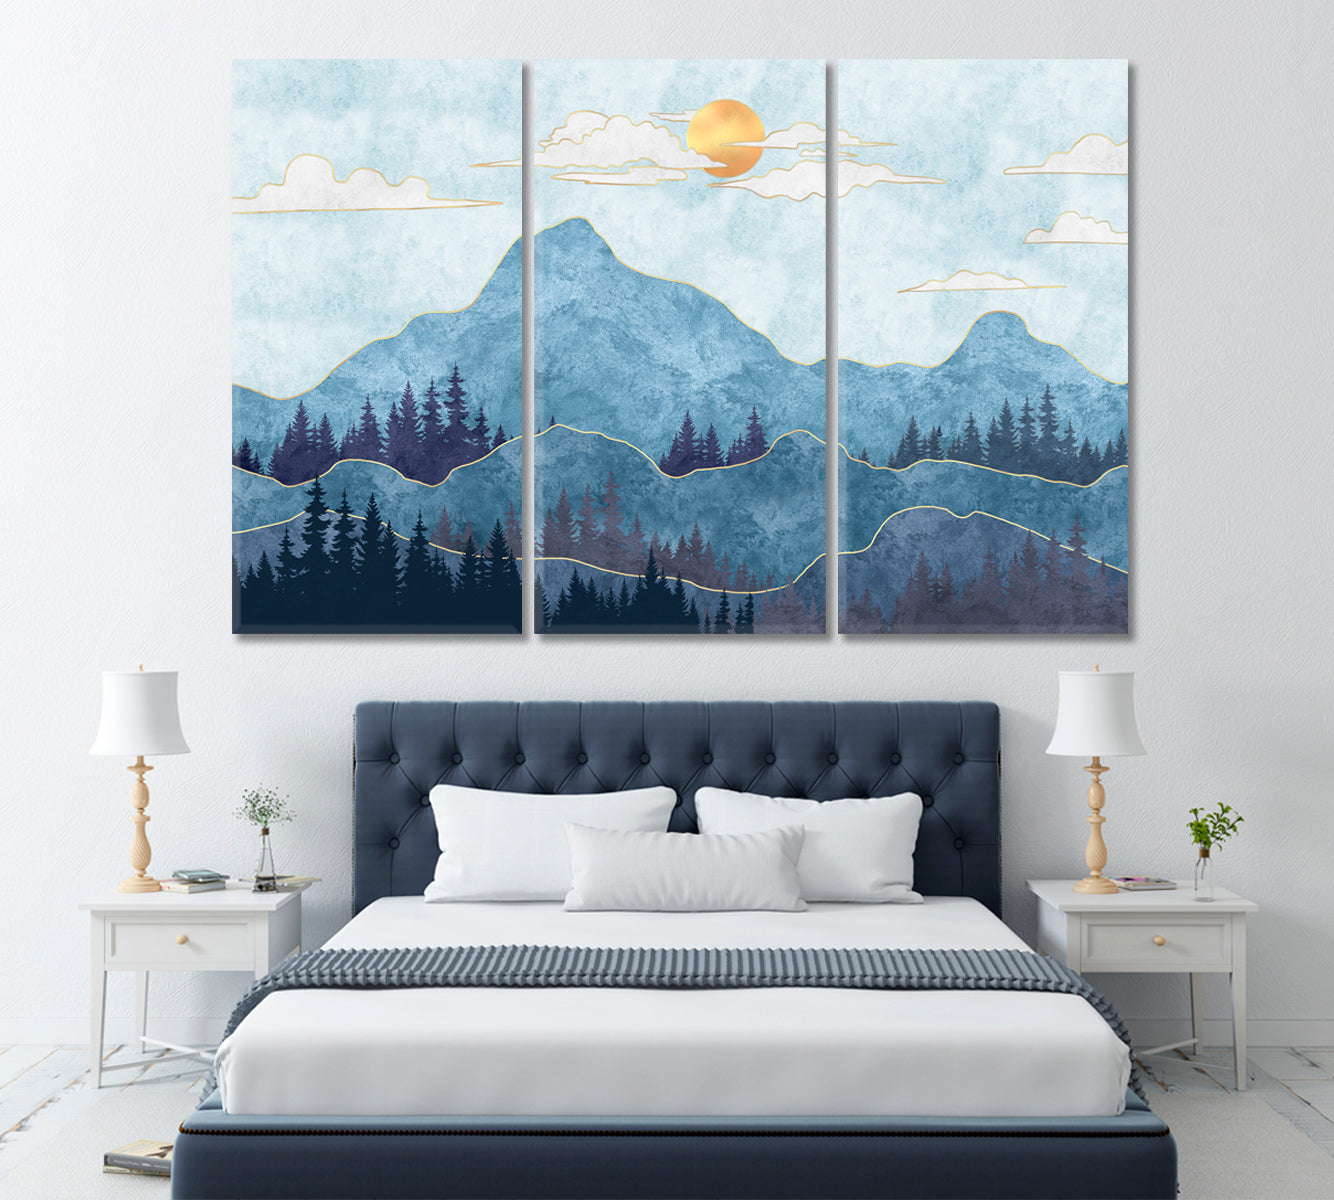 Modern Mountains Landscape Canvas Print ArtLexy 3 Panels 36"x24" inches 